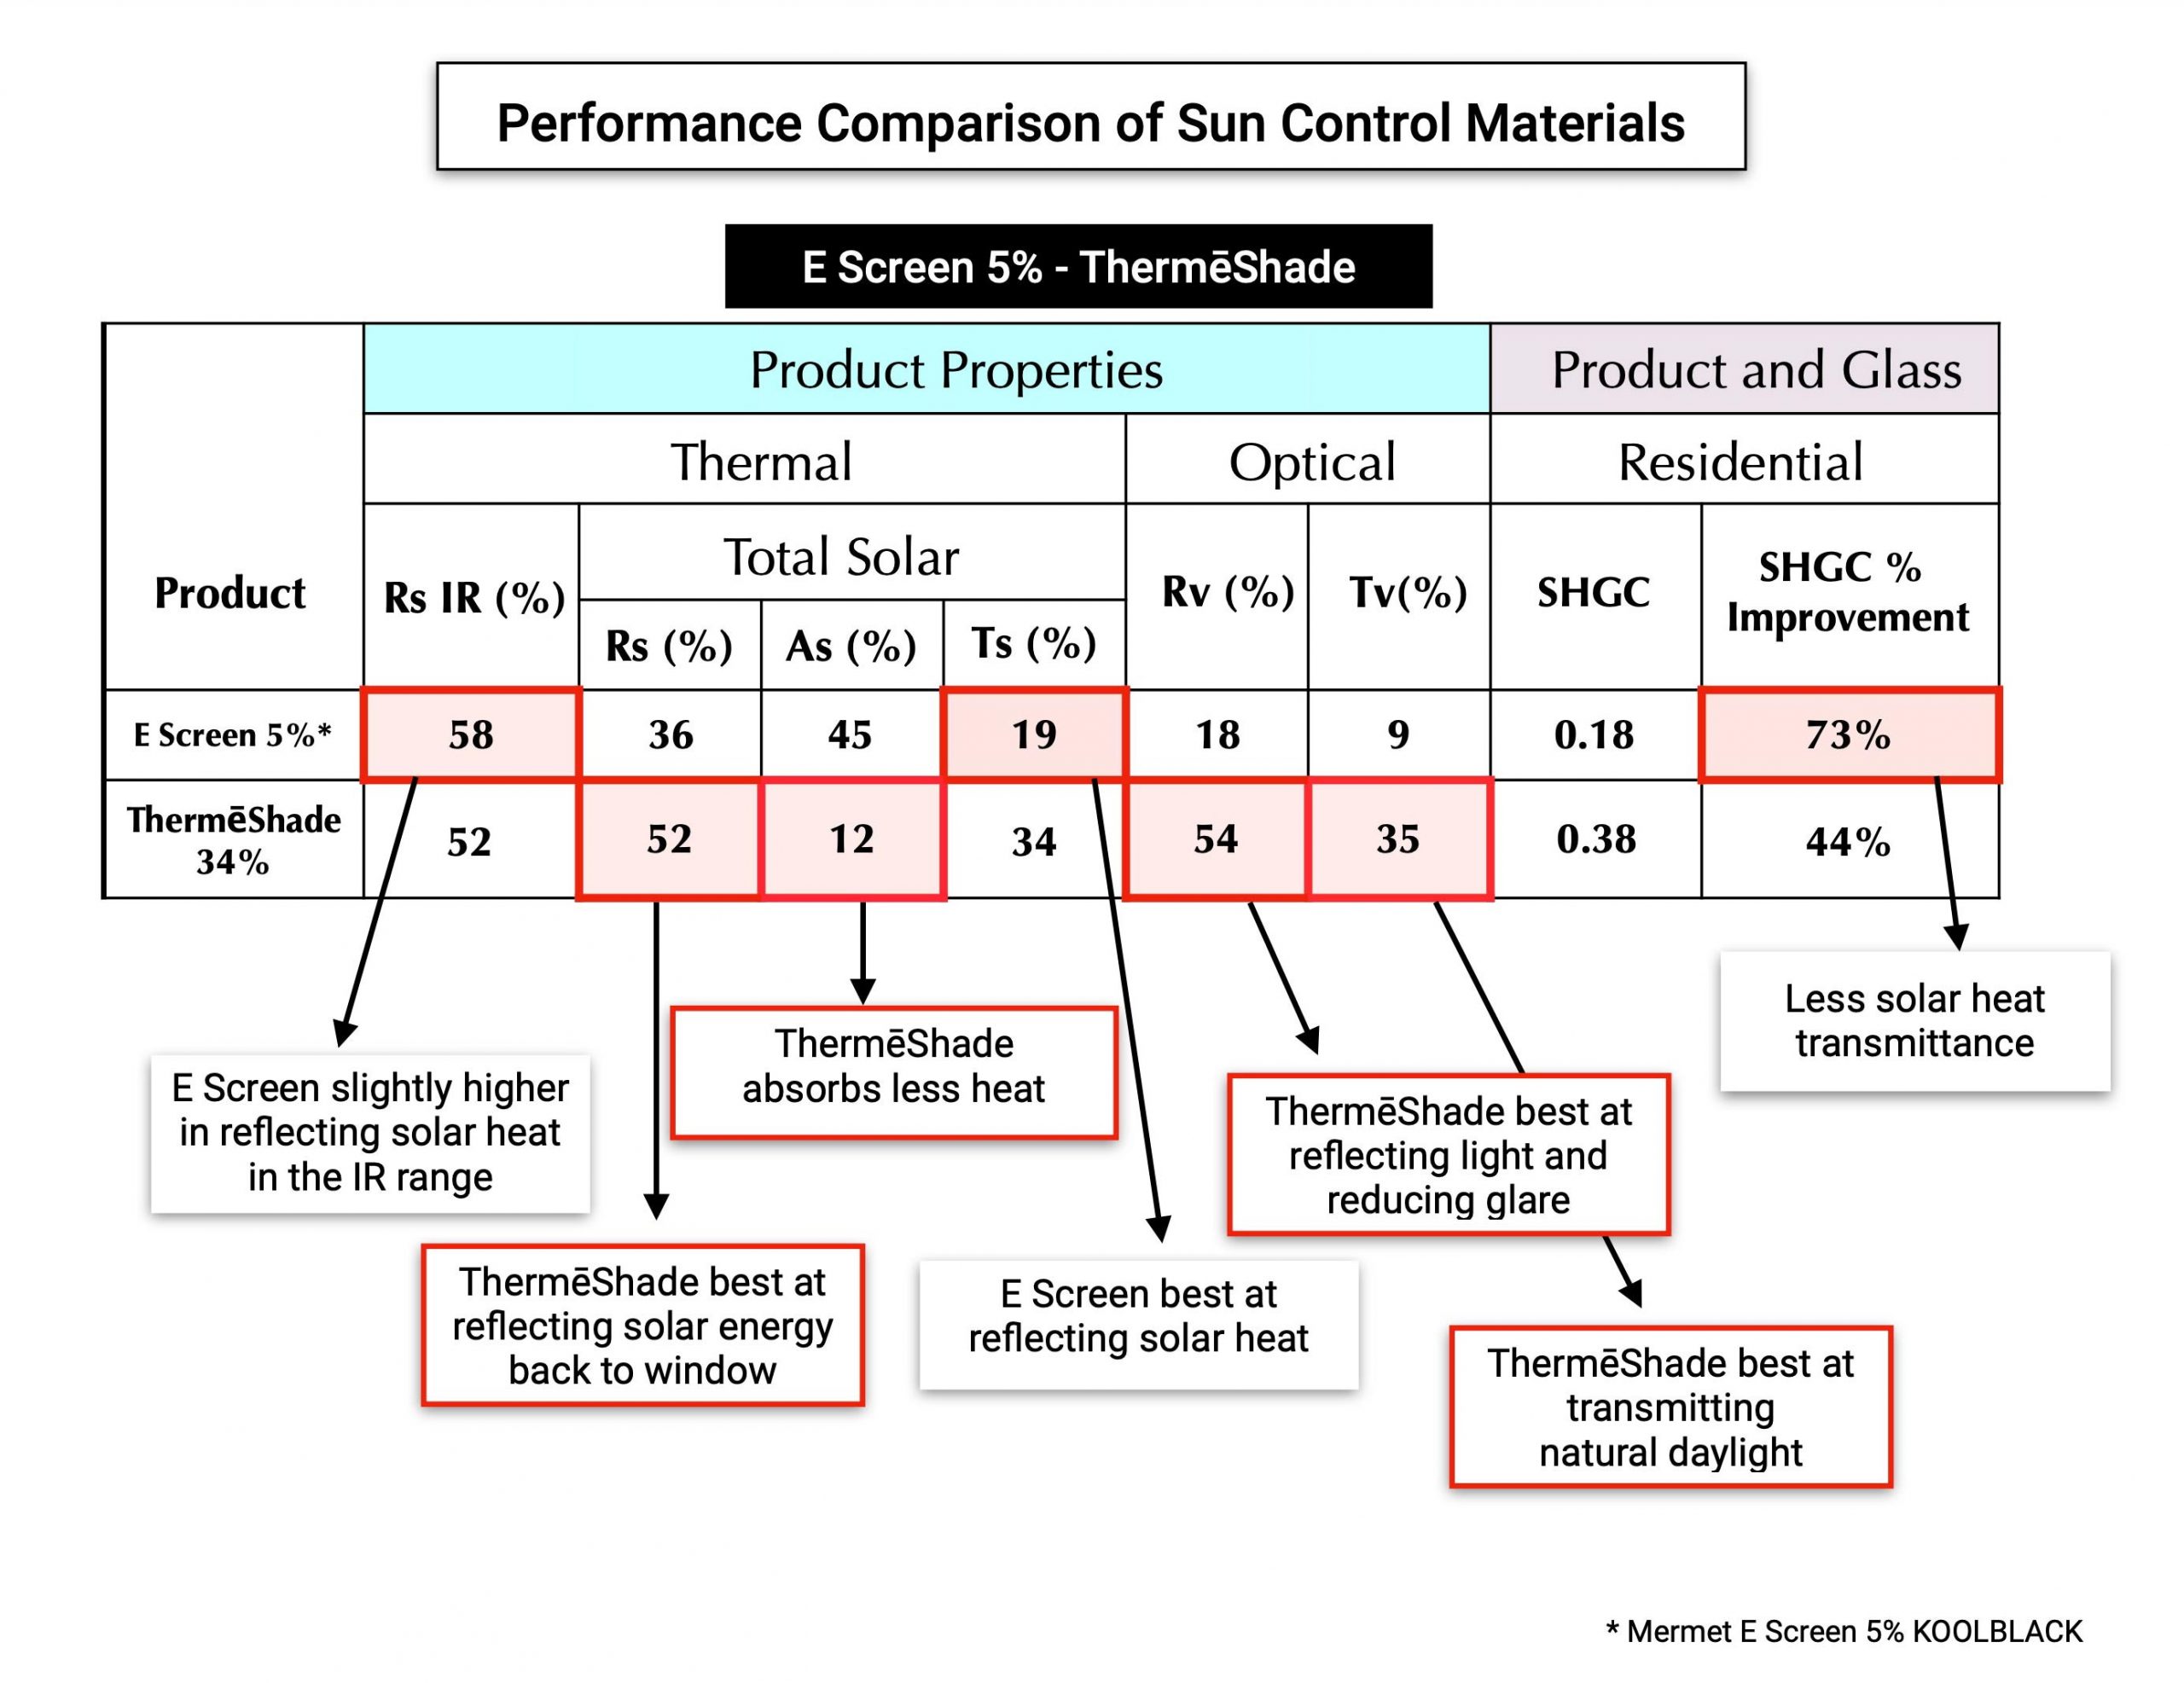  Performance Comparison of Sun Control Materials: Mermet E Screen 5% KOOLBLACK vs. ThermēShade. This chart provides thermal / solar and optical product properties and data for both window screen solutions. Data shows that the E Screen is slightly higher in reflecting solar heat in the IR range and best at reflecting solar heat with less solar heat transmittance. Data also shows that ThermēShade is best at reflecting solar energy back to window, reflecting light and reducing glare, and transmitting natural daylight, and absorbs less heat than E-Screen.